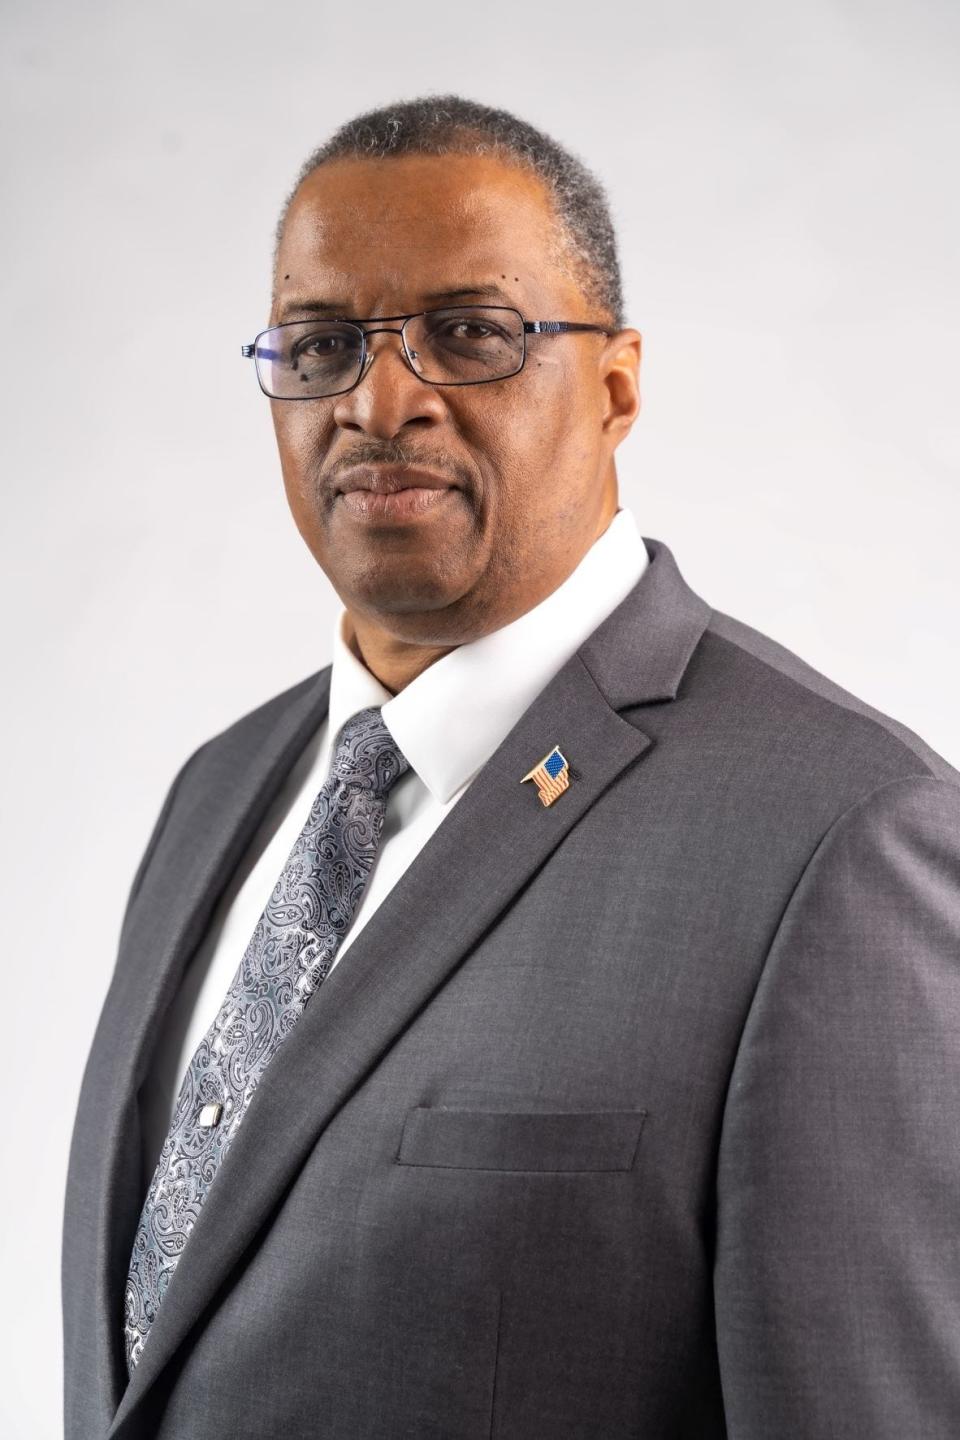 David Williams was elected in 2022 to serve on the Escambia County School Board.